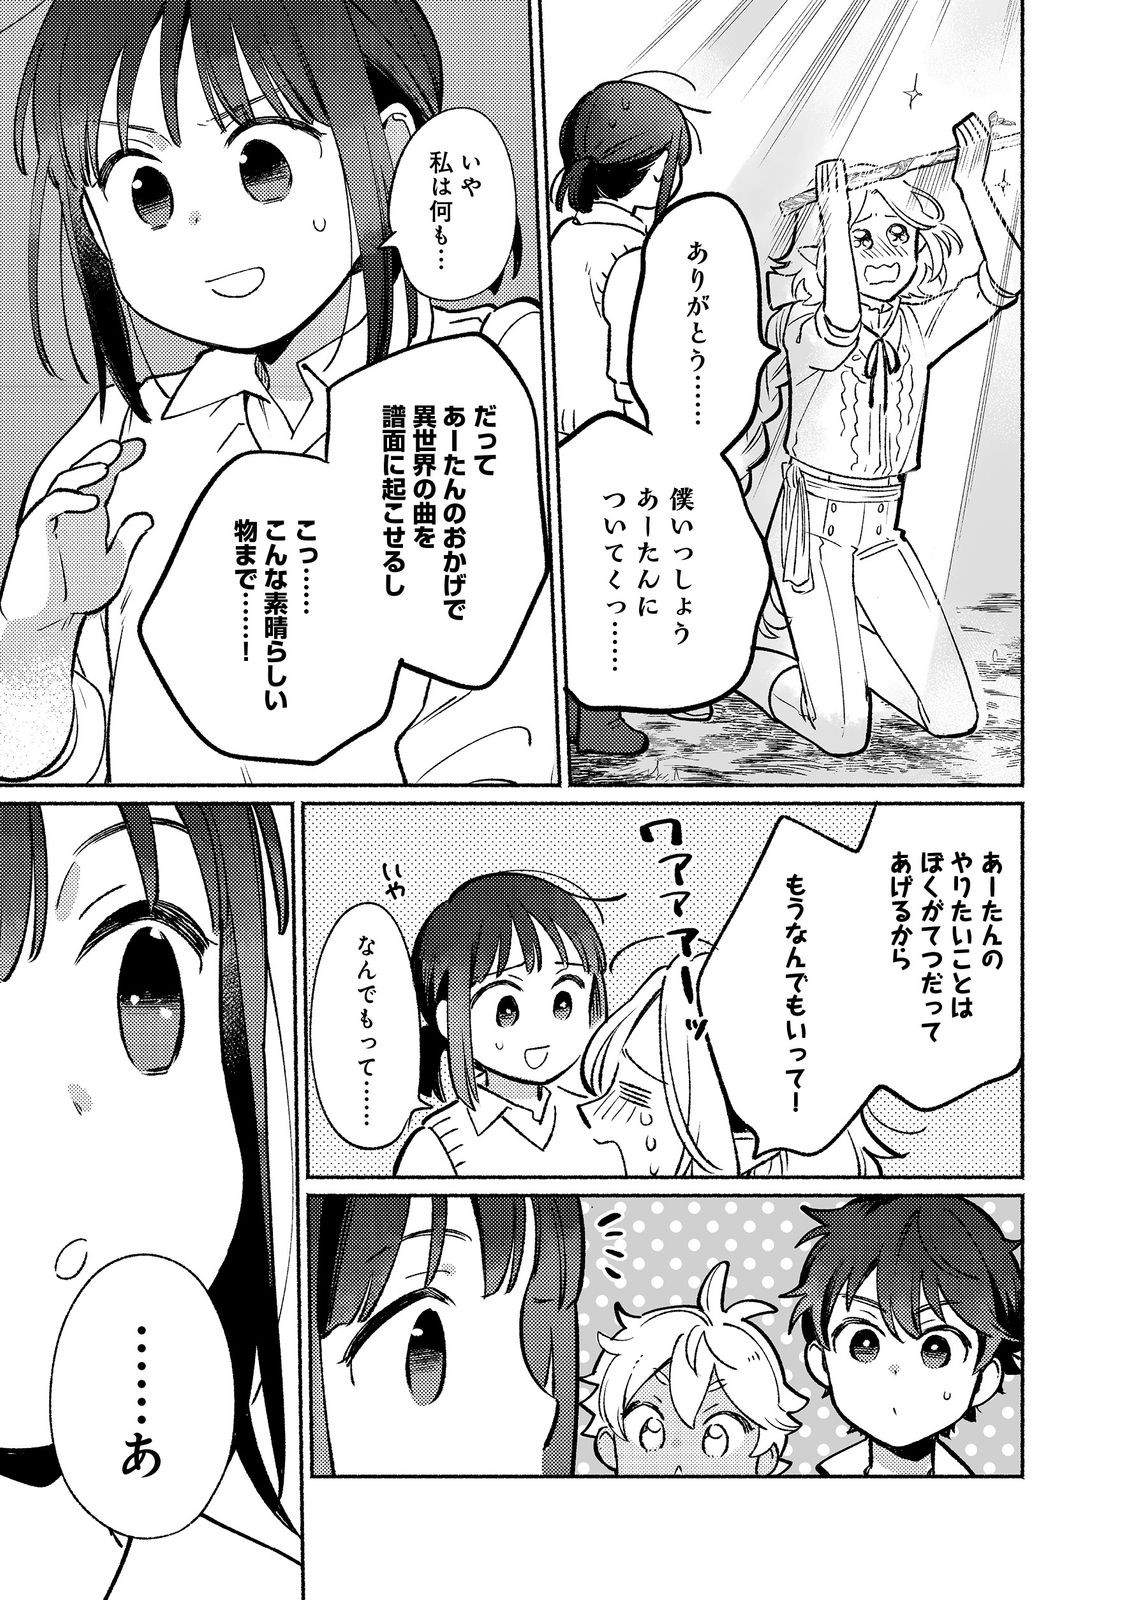 I’m the White Pig Nobleman 第18.2話 - Page 12